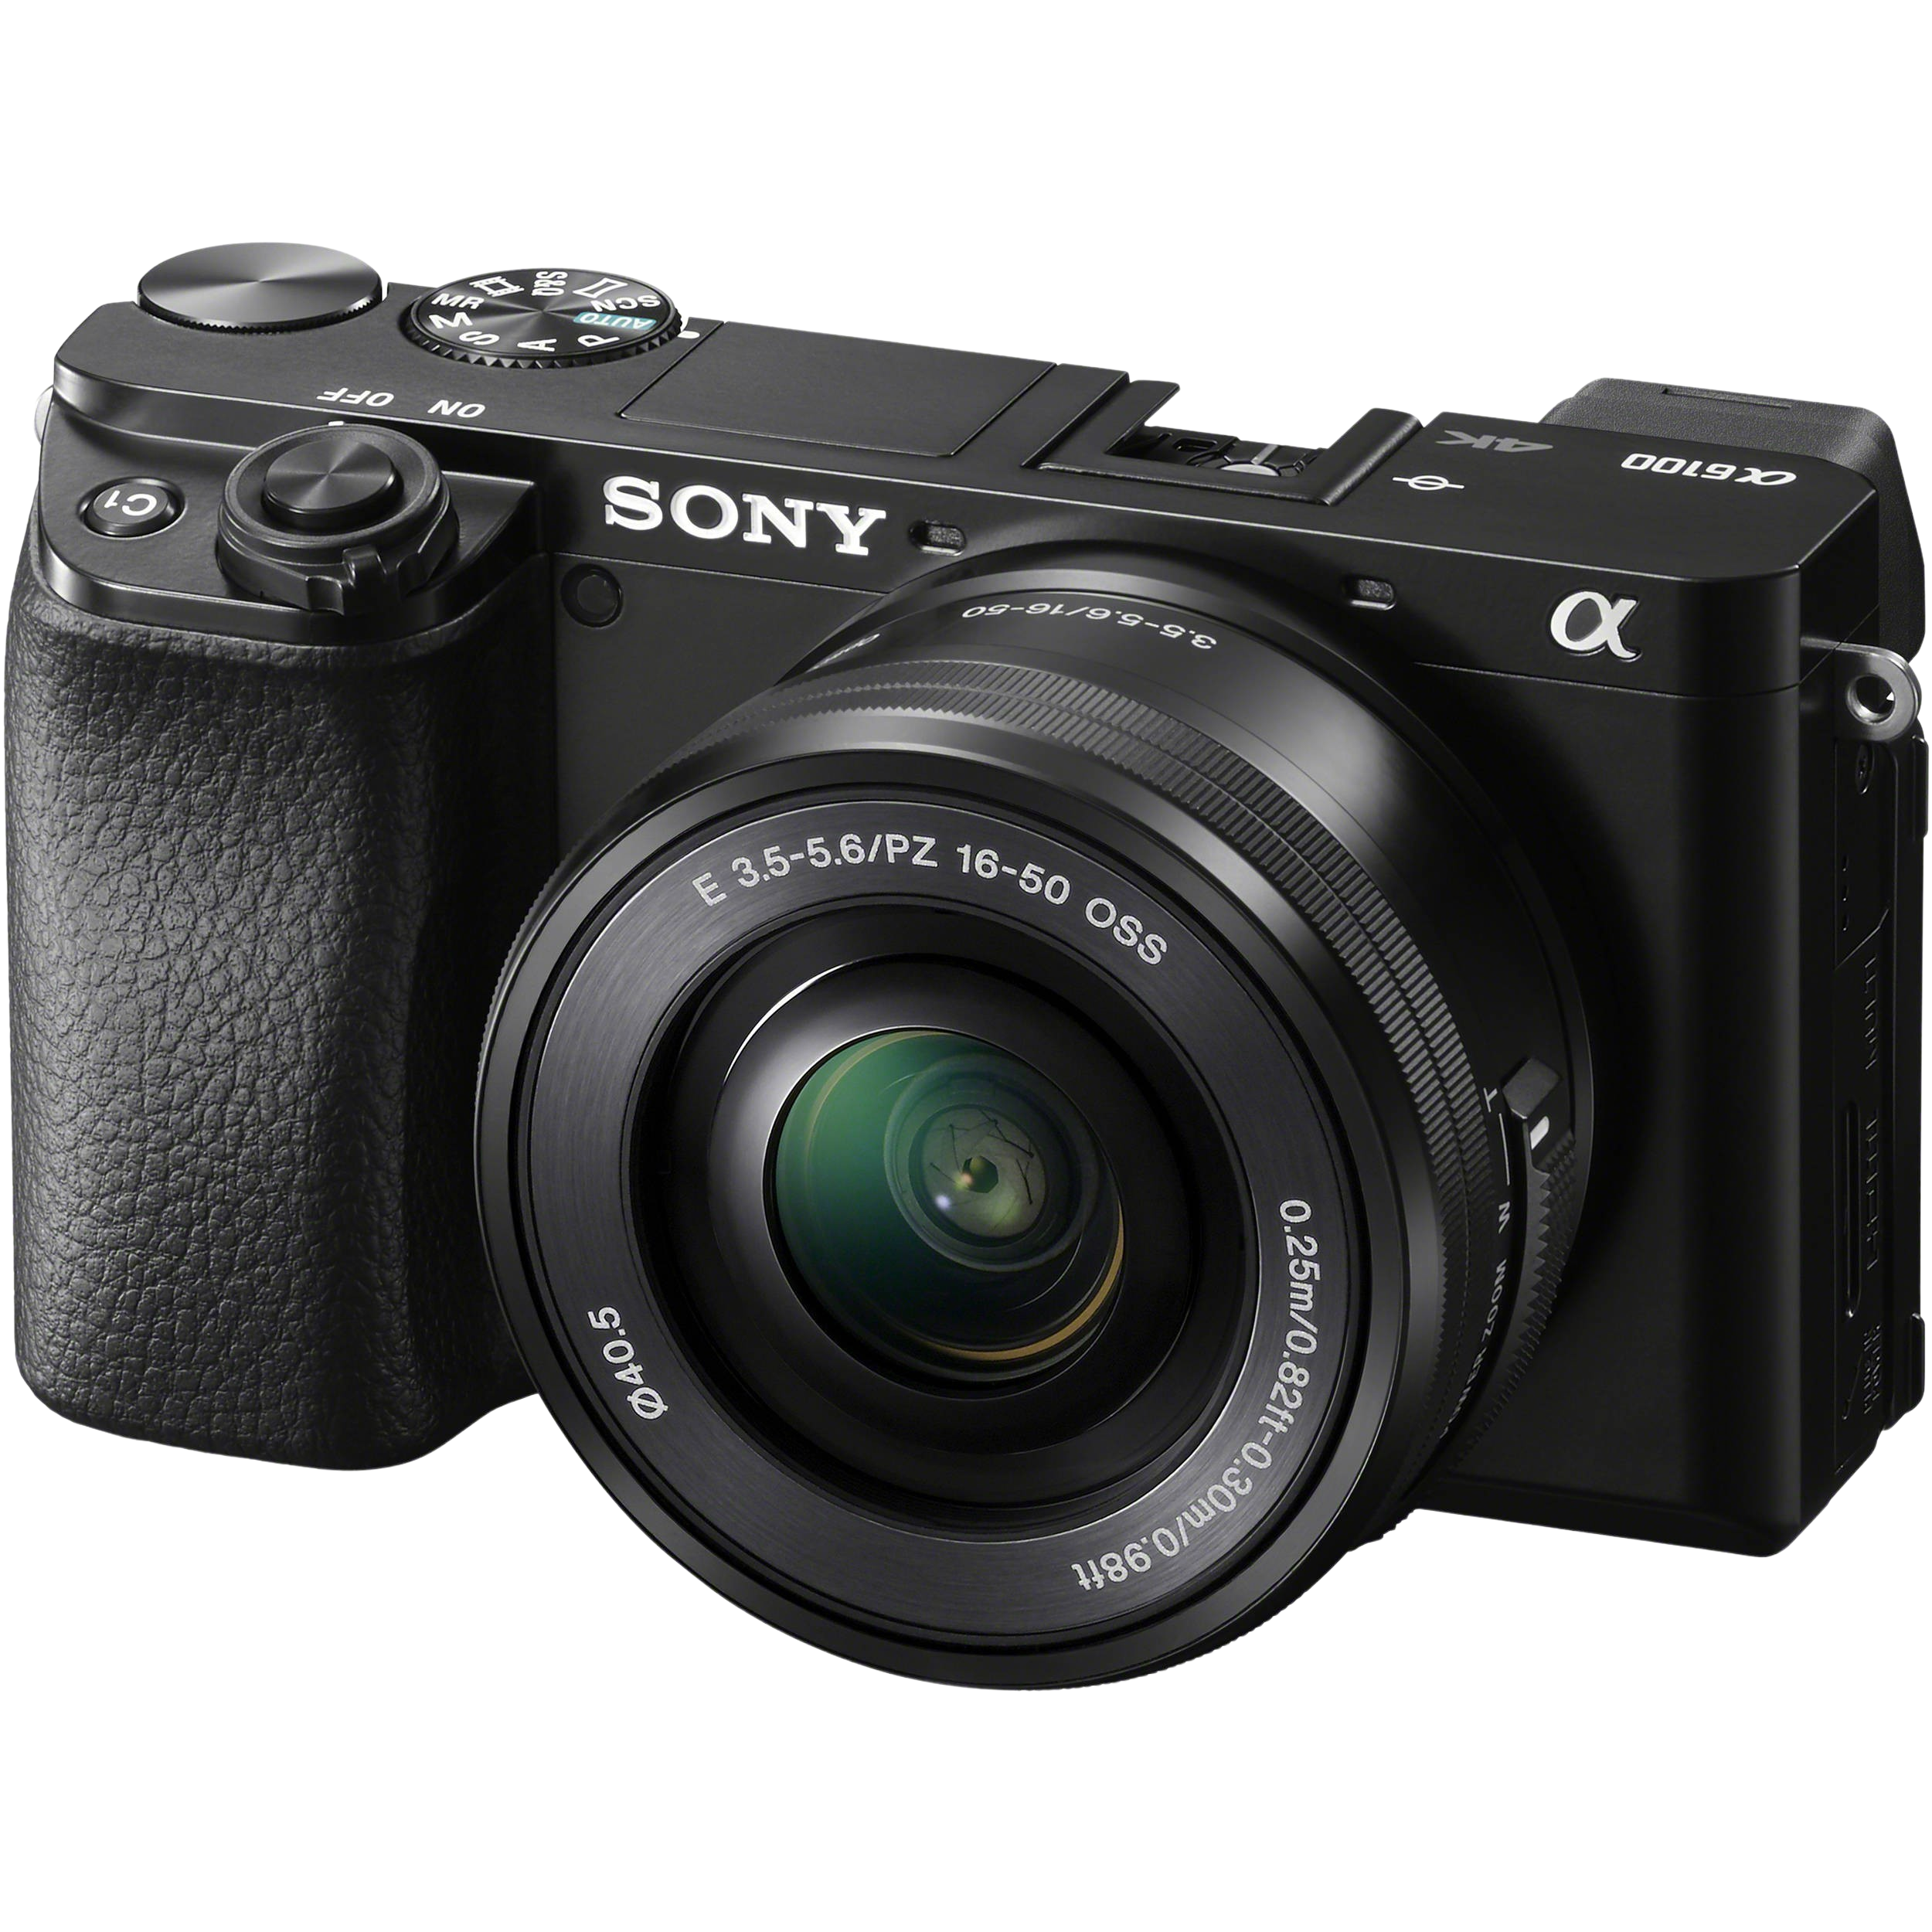 Rent Sony A6000 + 16-50mm f/3.5-5.6 OSS PZ, Camera kit from €34.90 per month